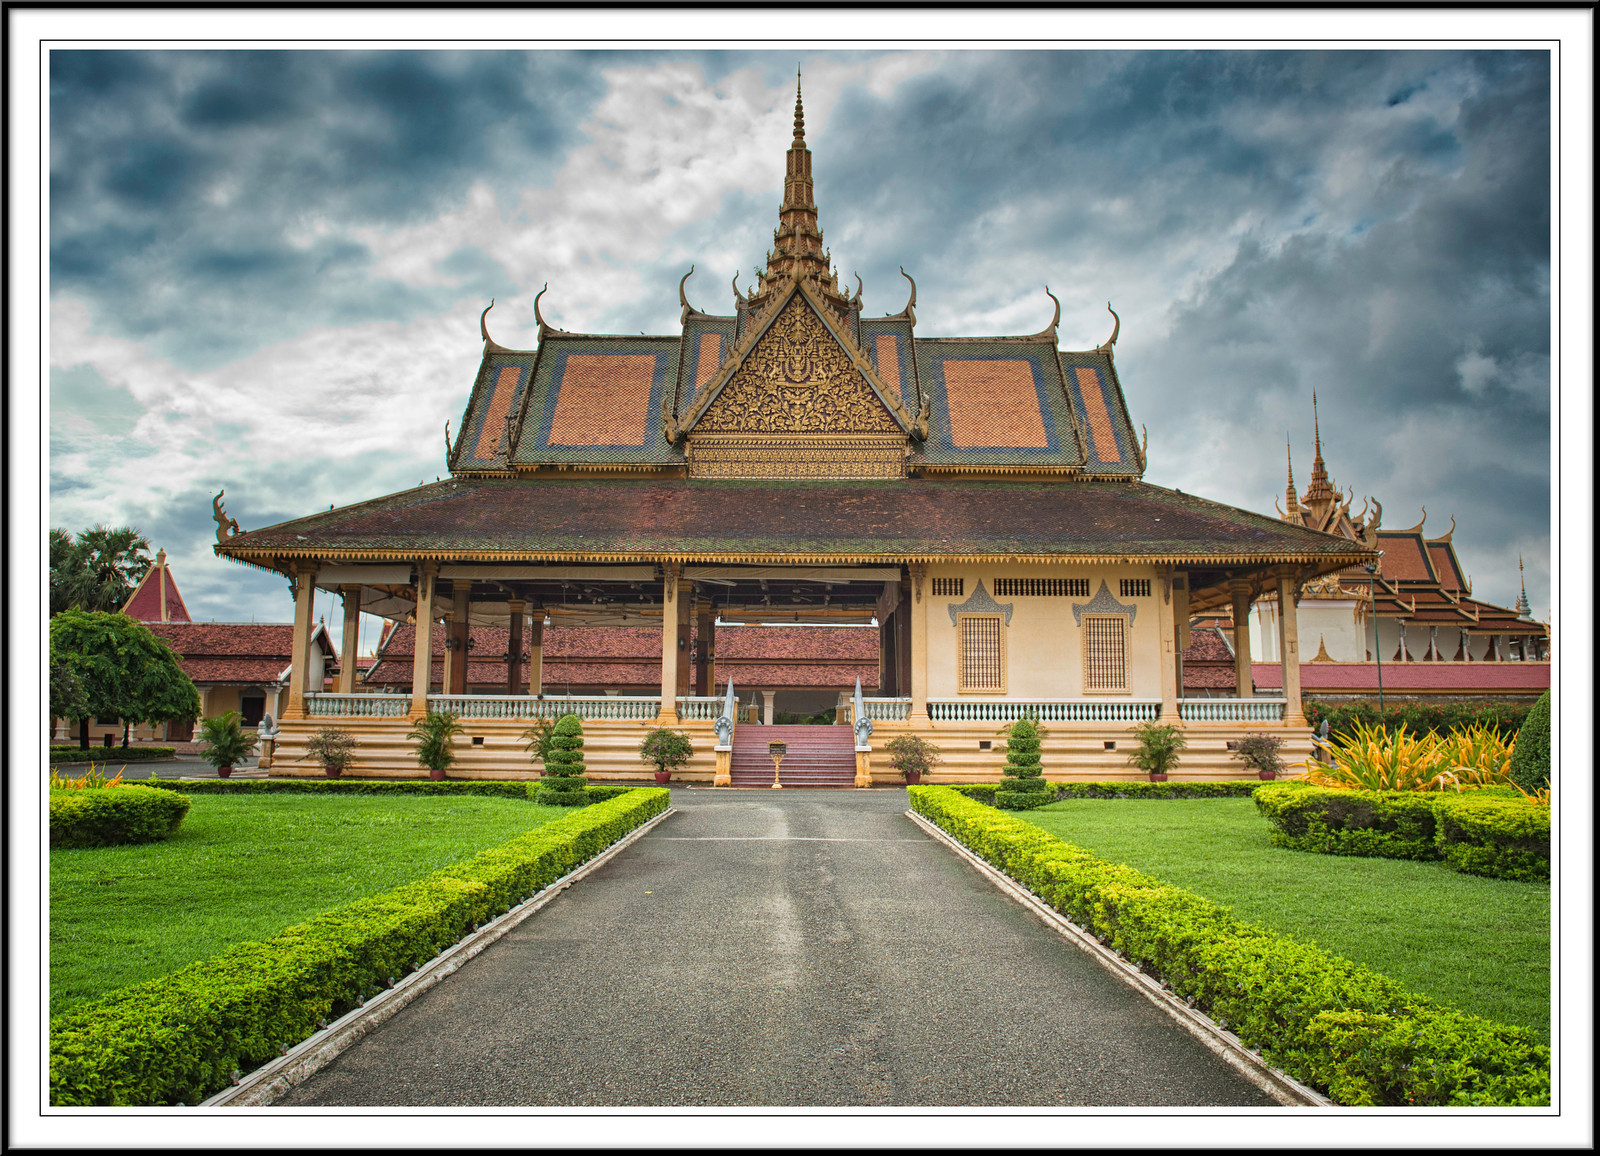      

 
  Part of the King's palace grounds, Phnom Penh Cambodia
 






















     